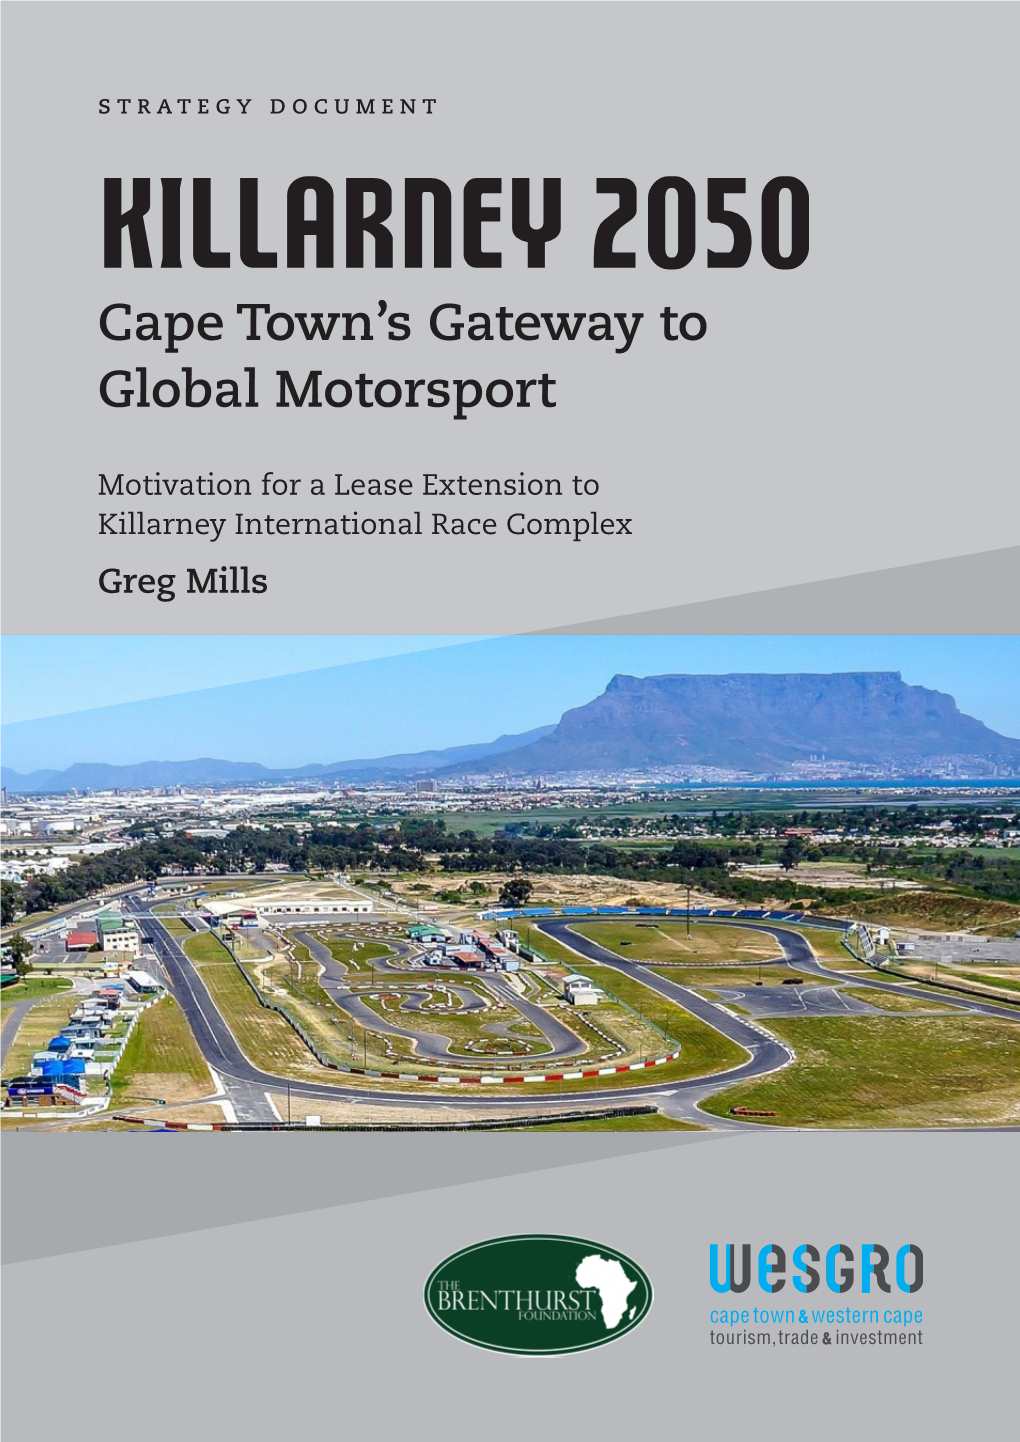 Cape Town's Gateway to Global Motorsport